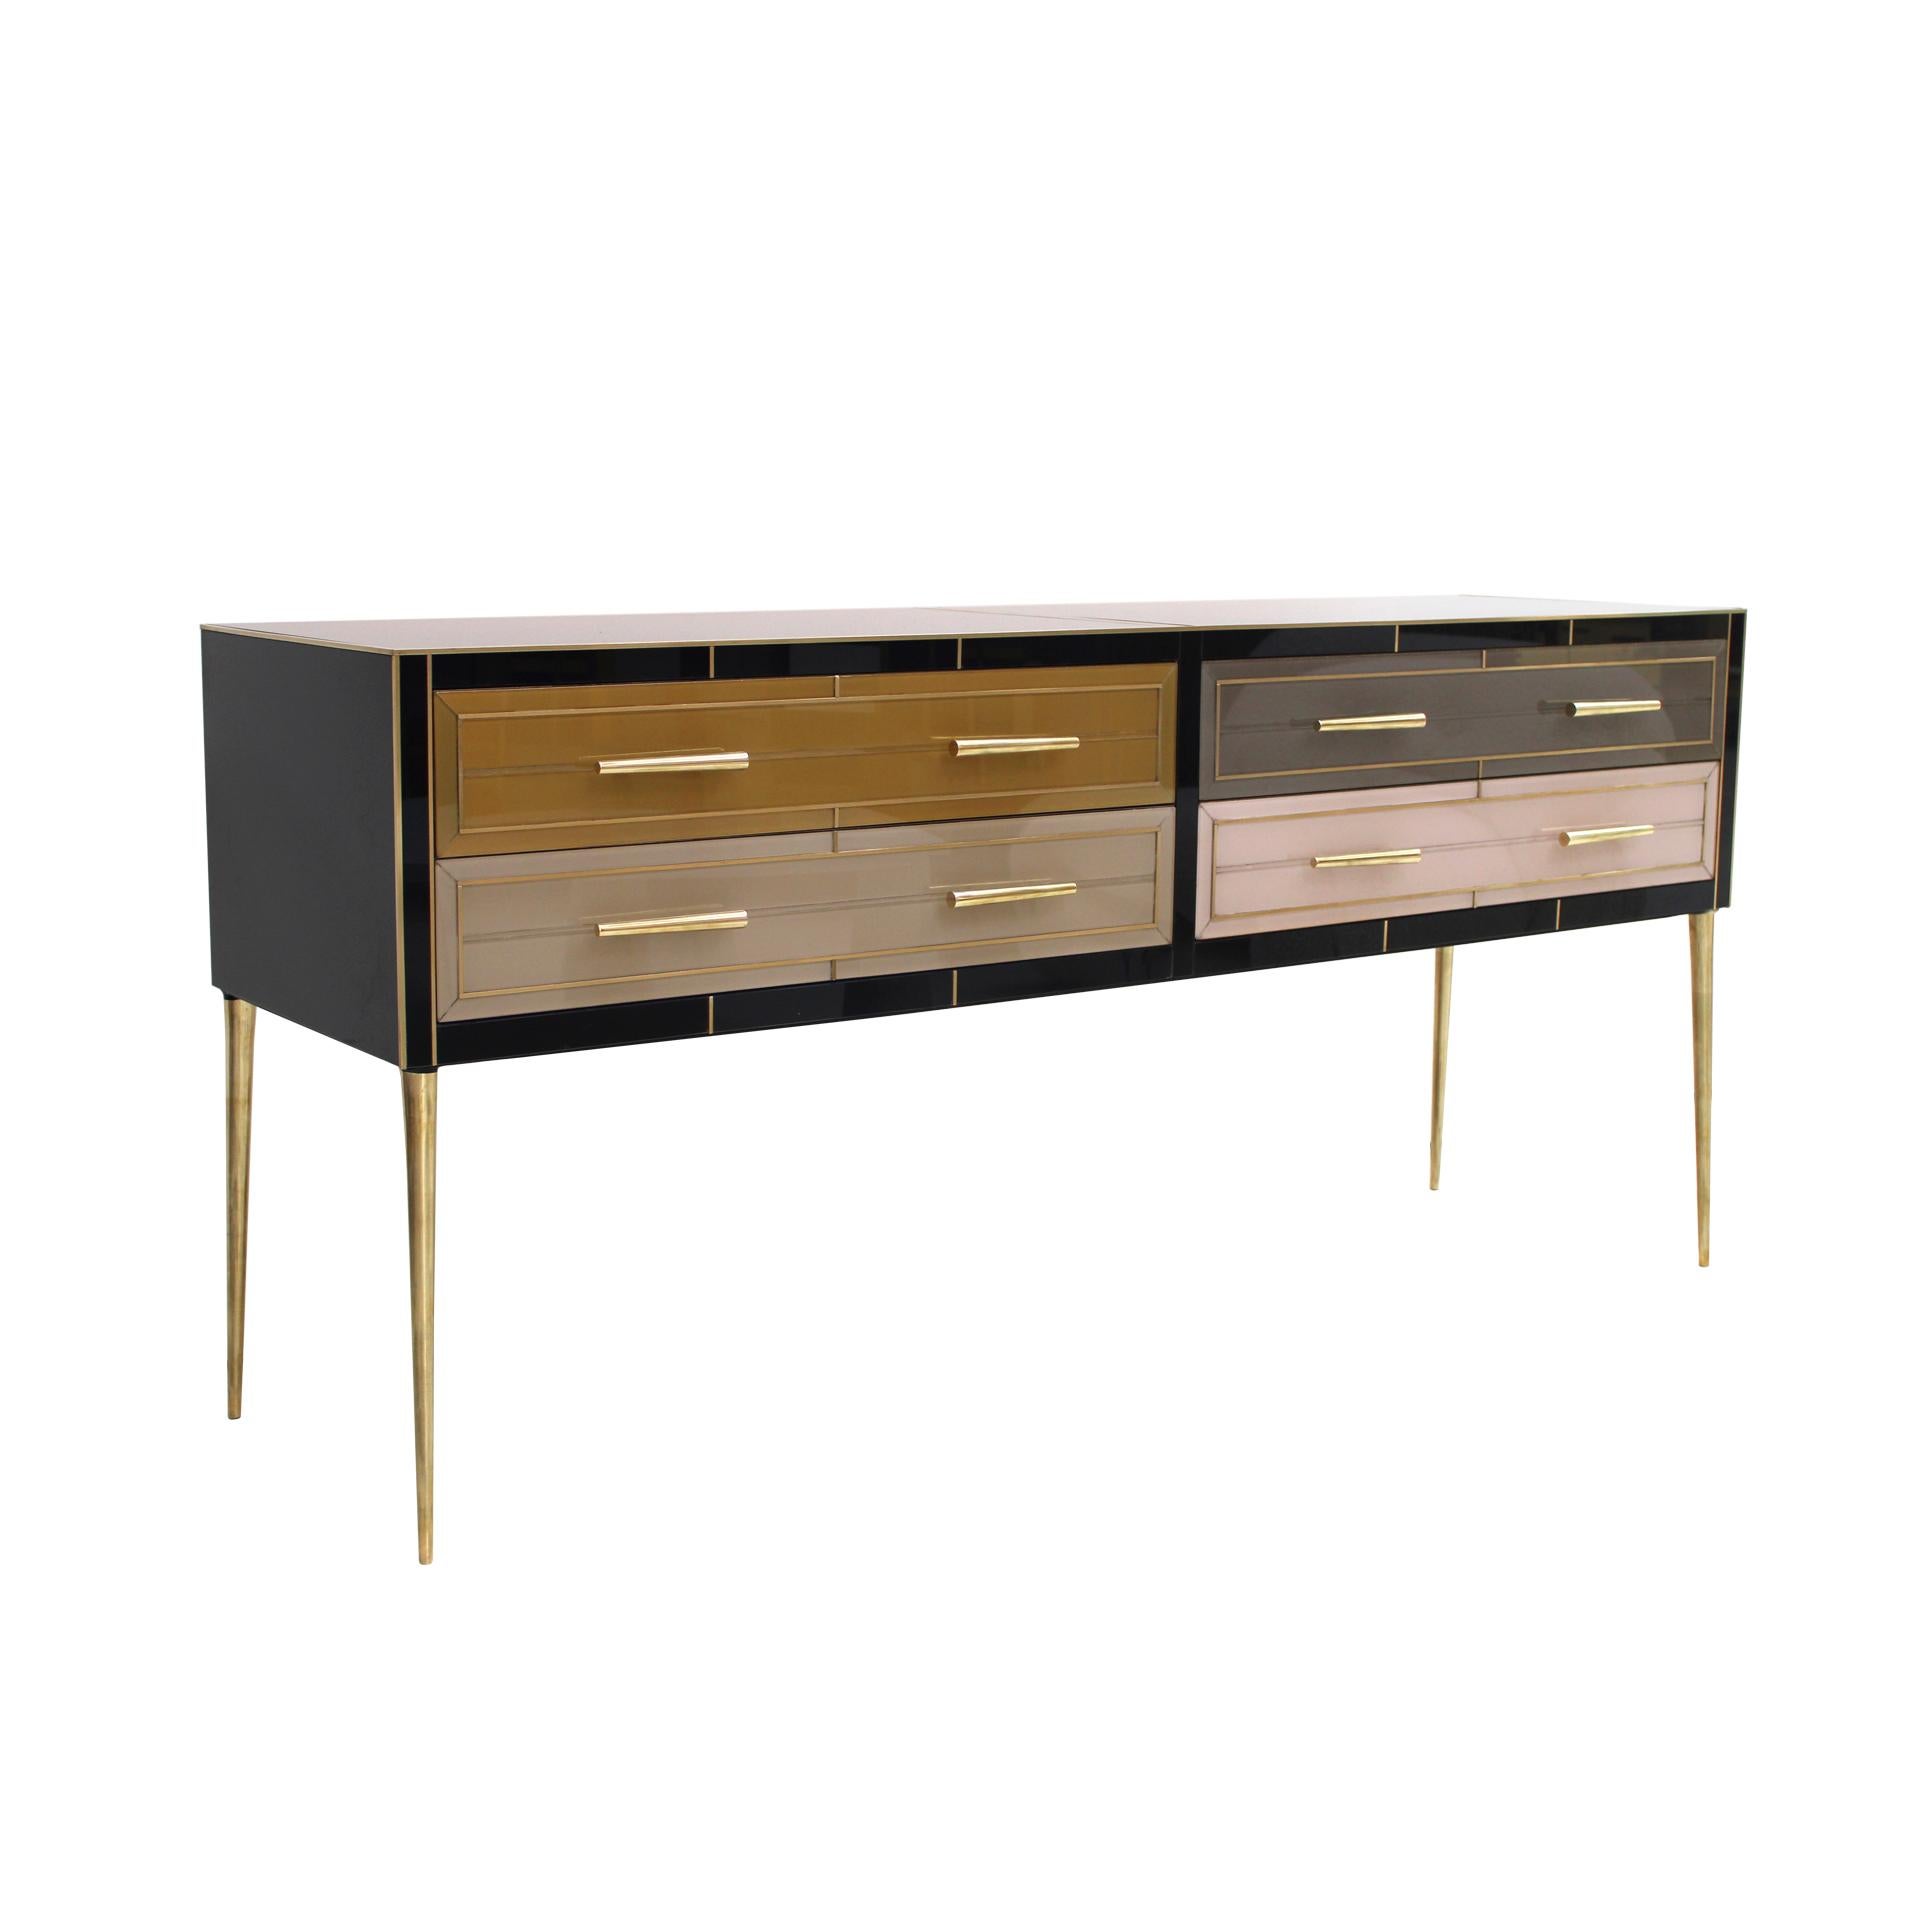 Sideboard composed of 4 drawers with an original structure from the 1950s made of solid wood and covered with colored glass. Handles, legs and profiles made of brass. Italy, 1950s.

Production time between 5 and 6 weeks.

Take into account that the